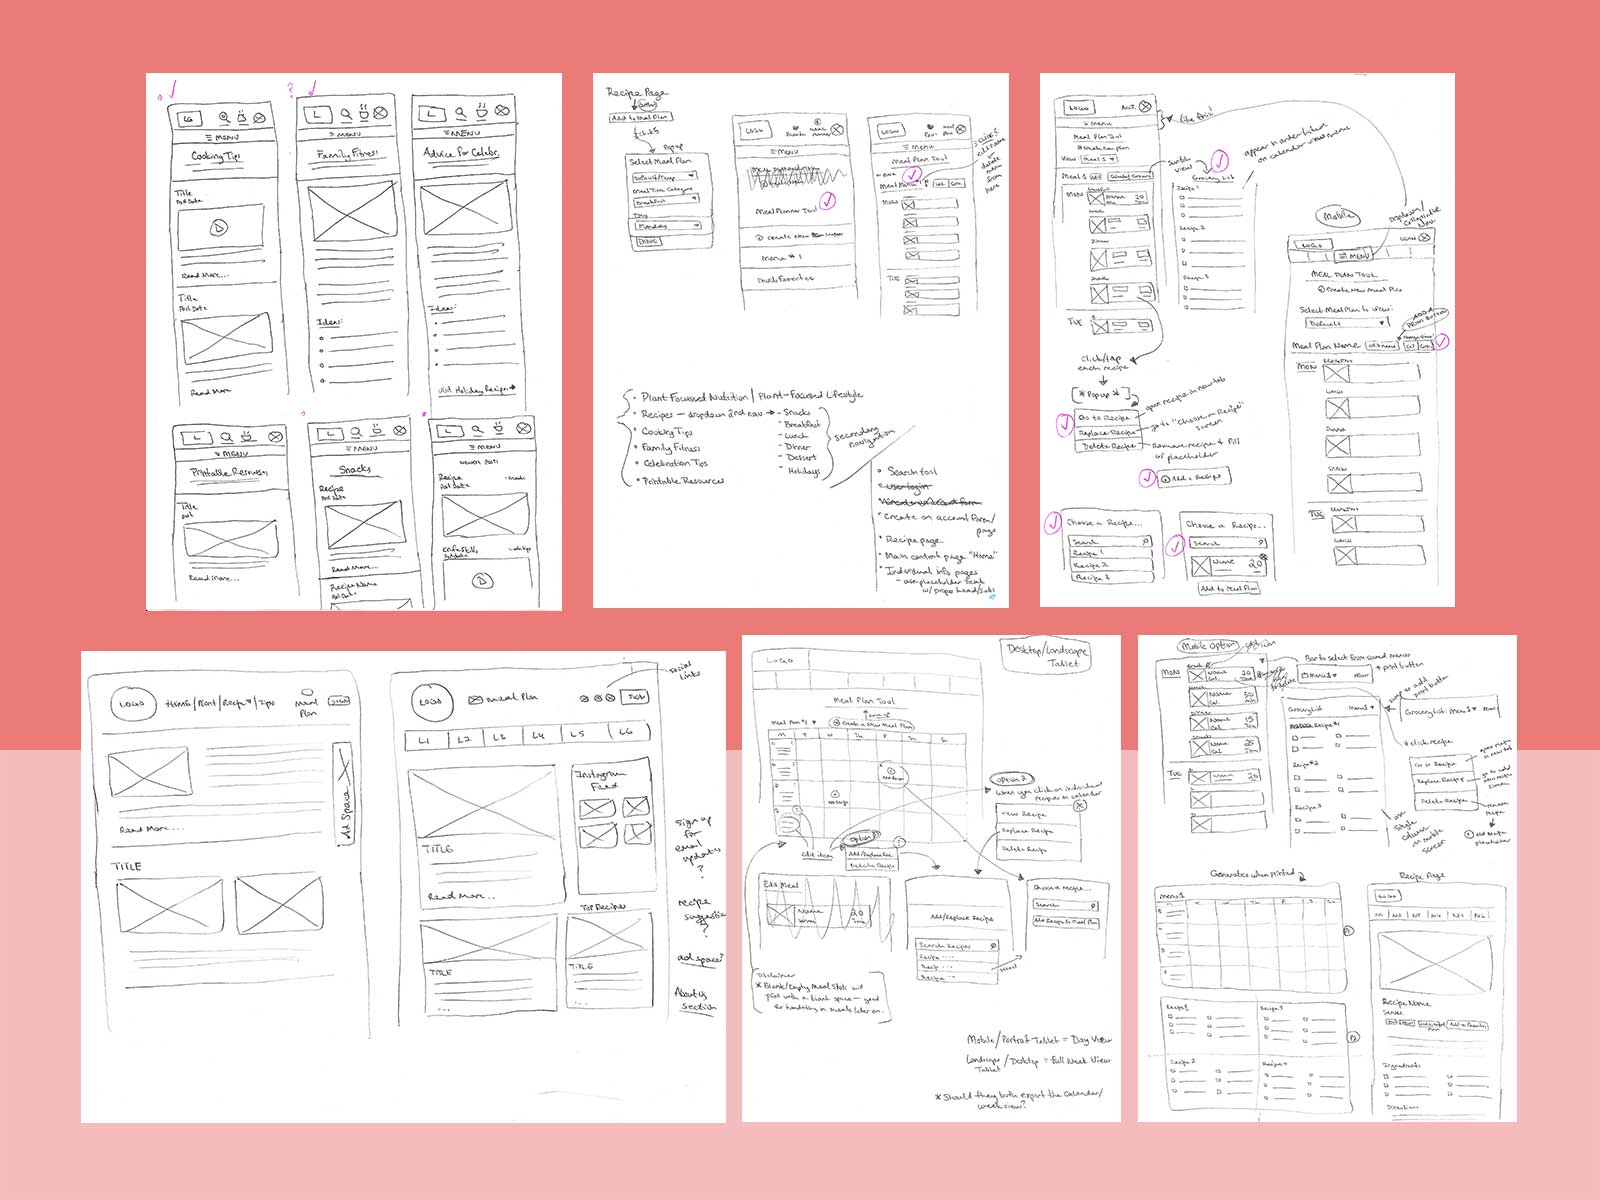 Samples of early mobile layout sketches of the project